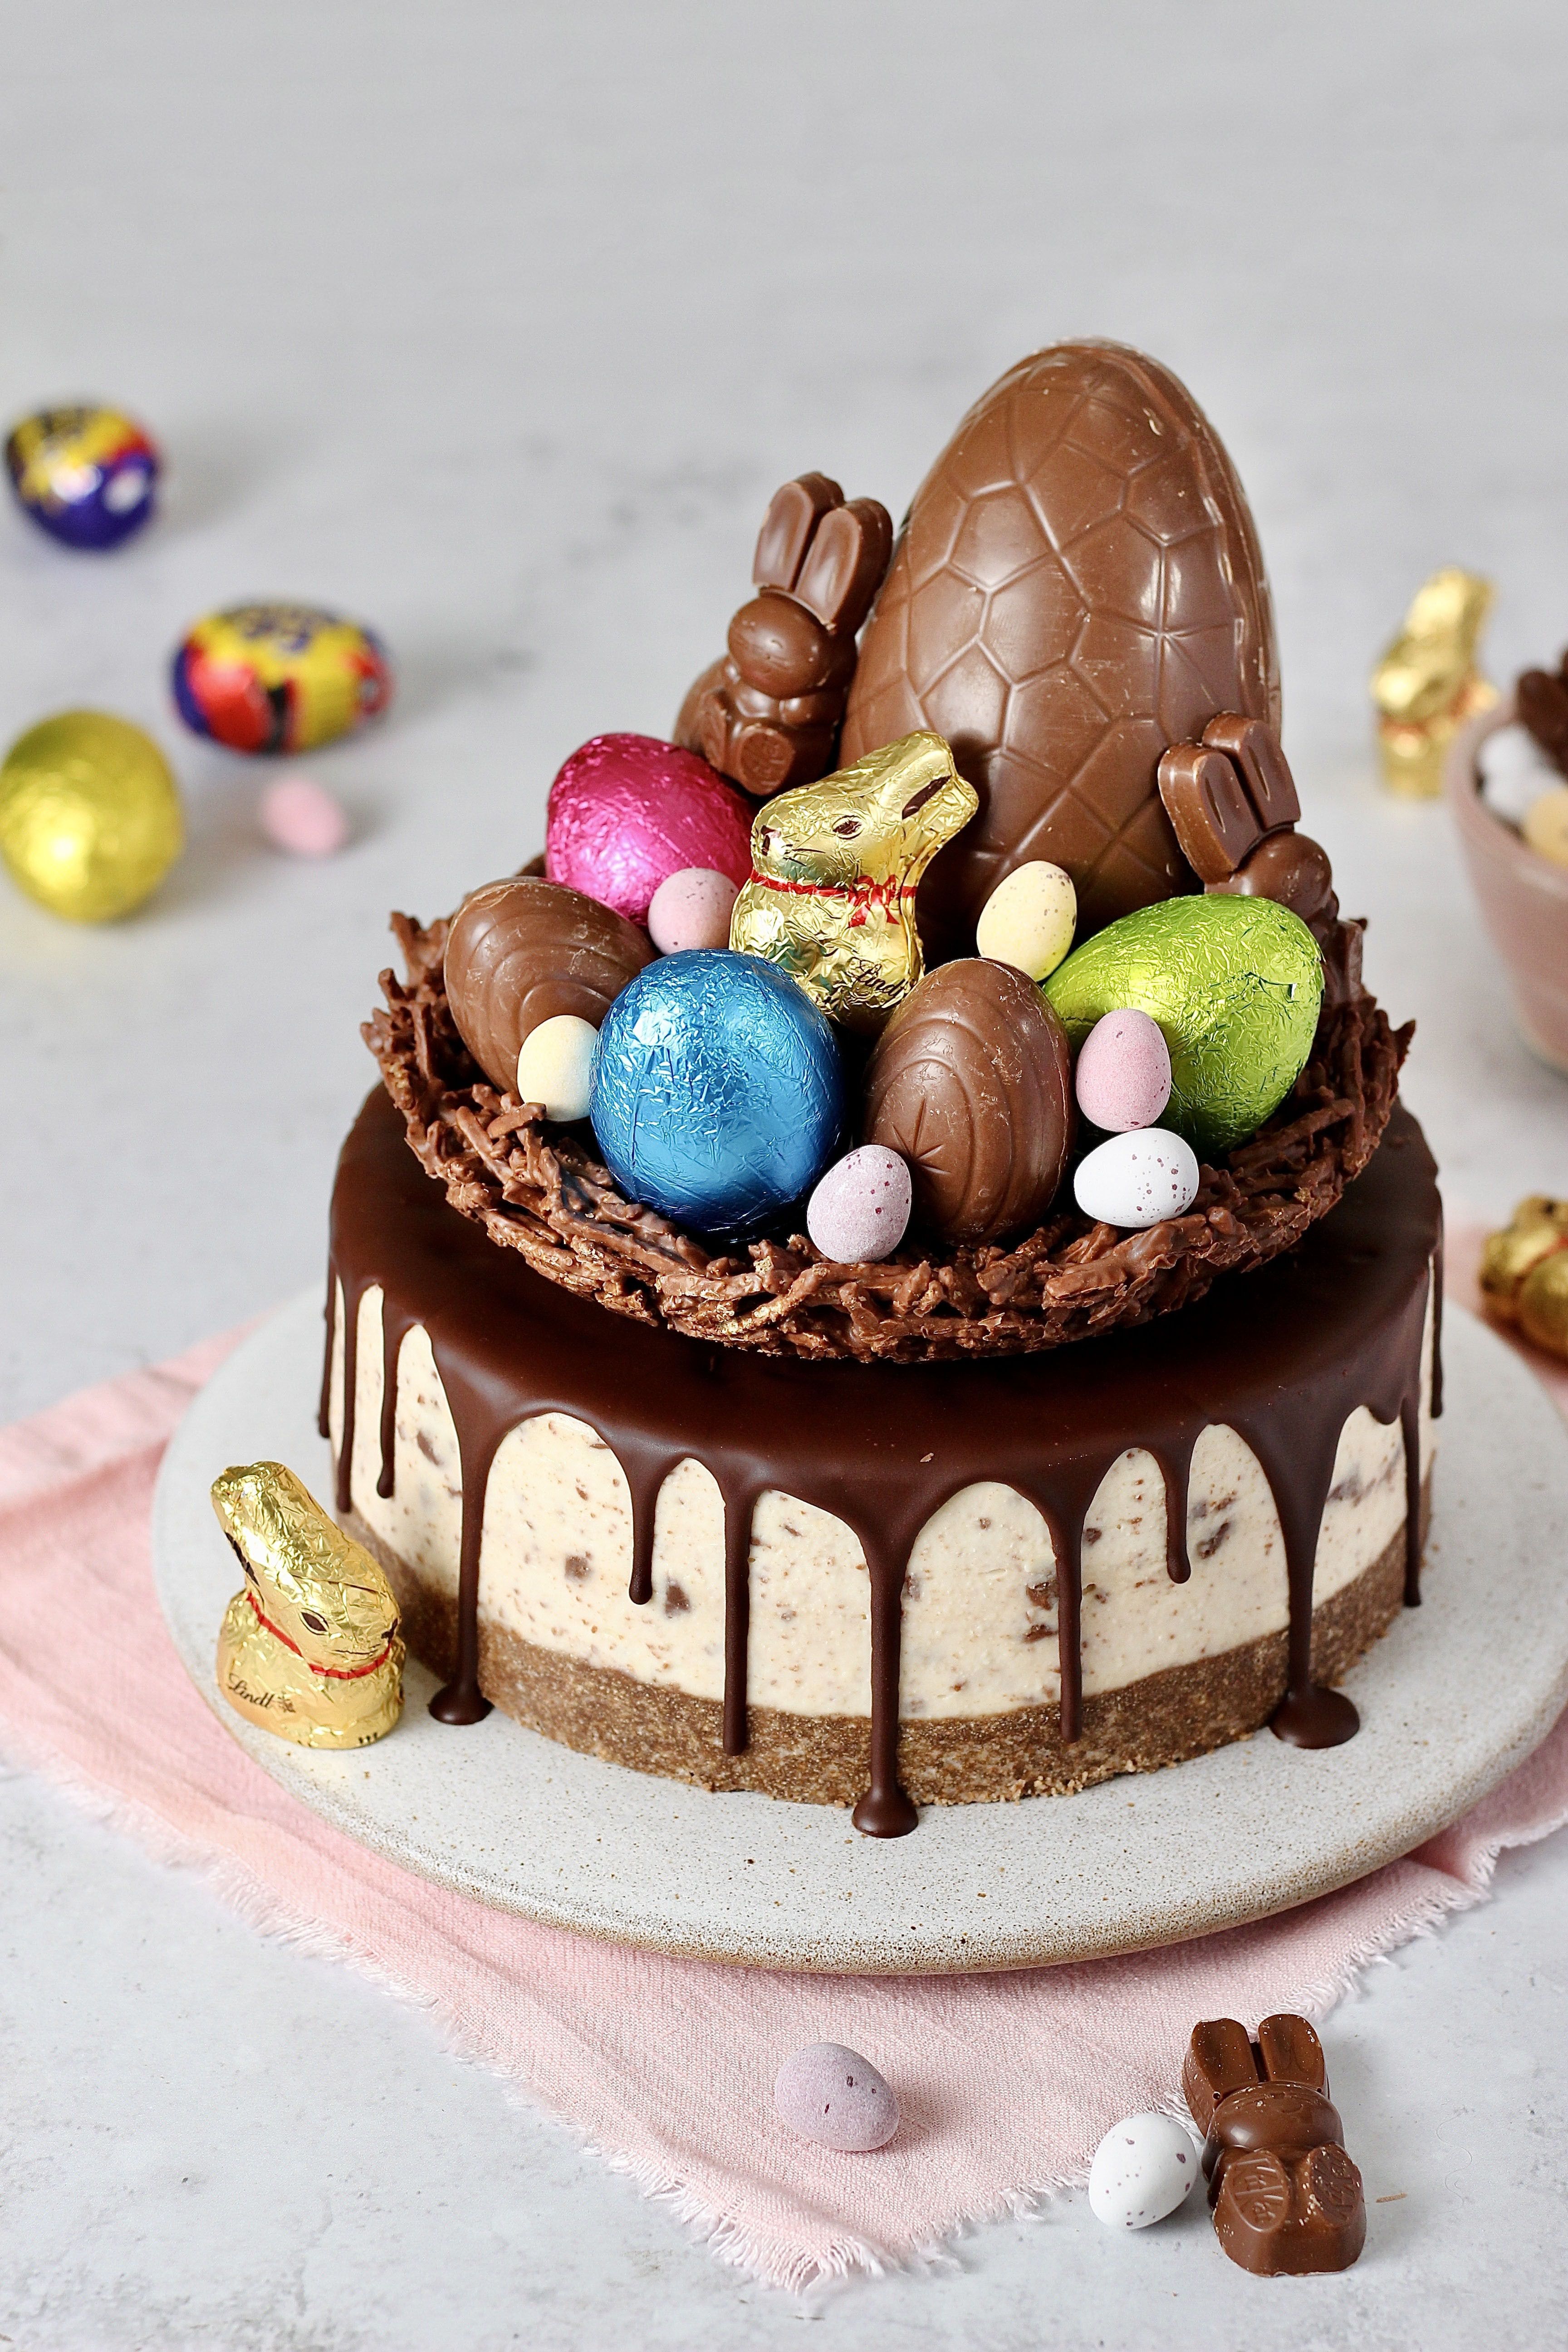 Best Easter Cake Recipes | 32 Fun Easter Cake Ideas